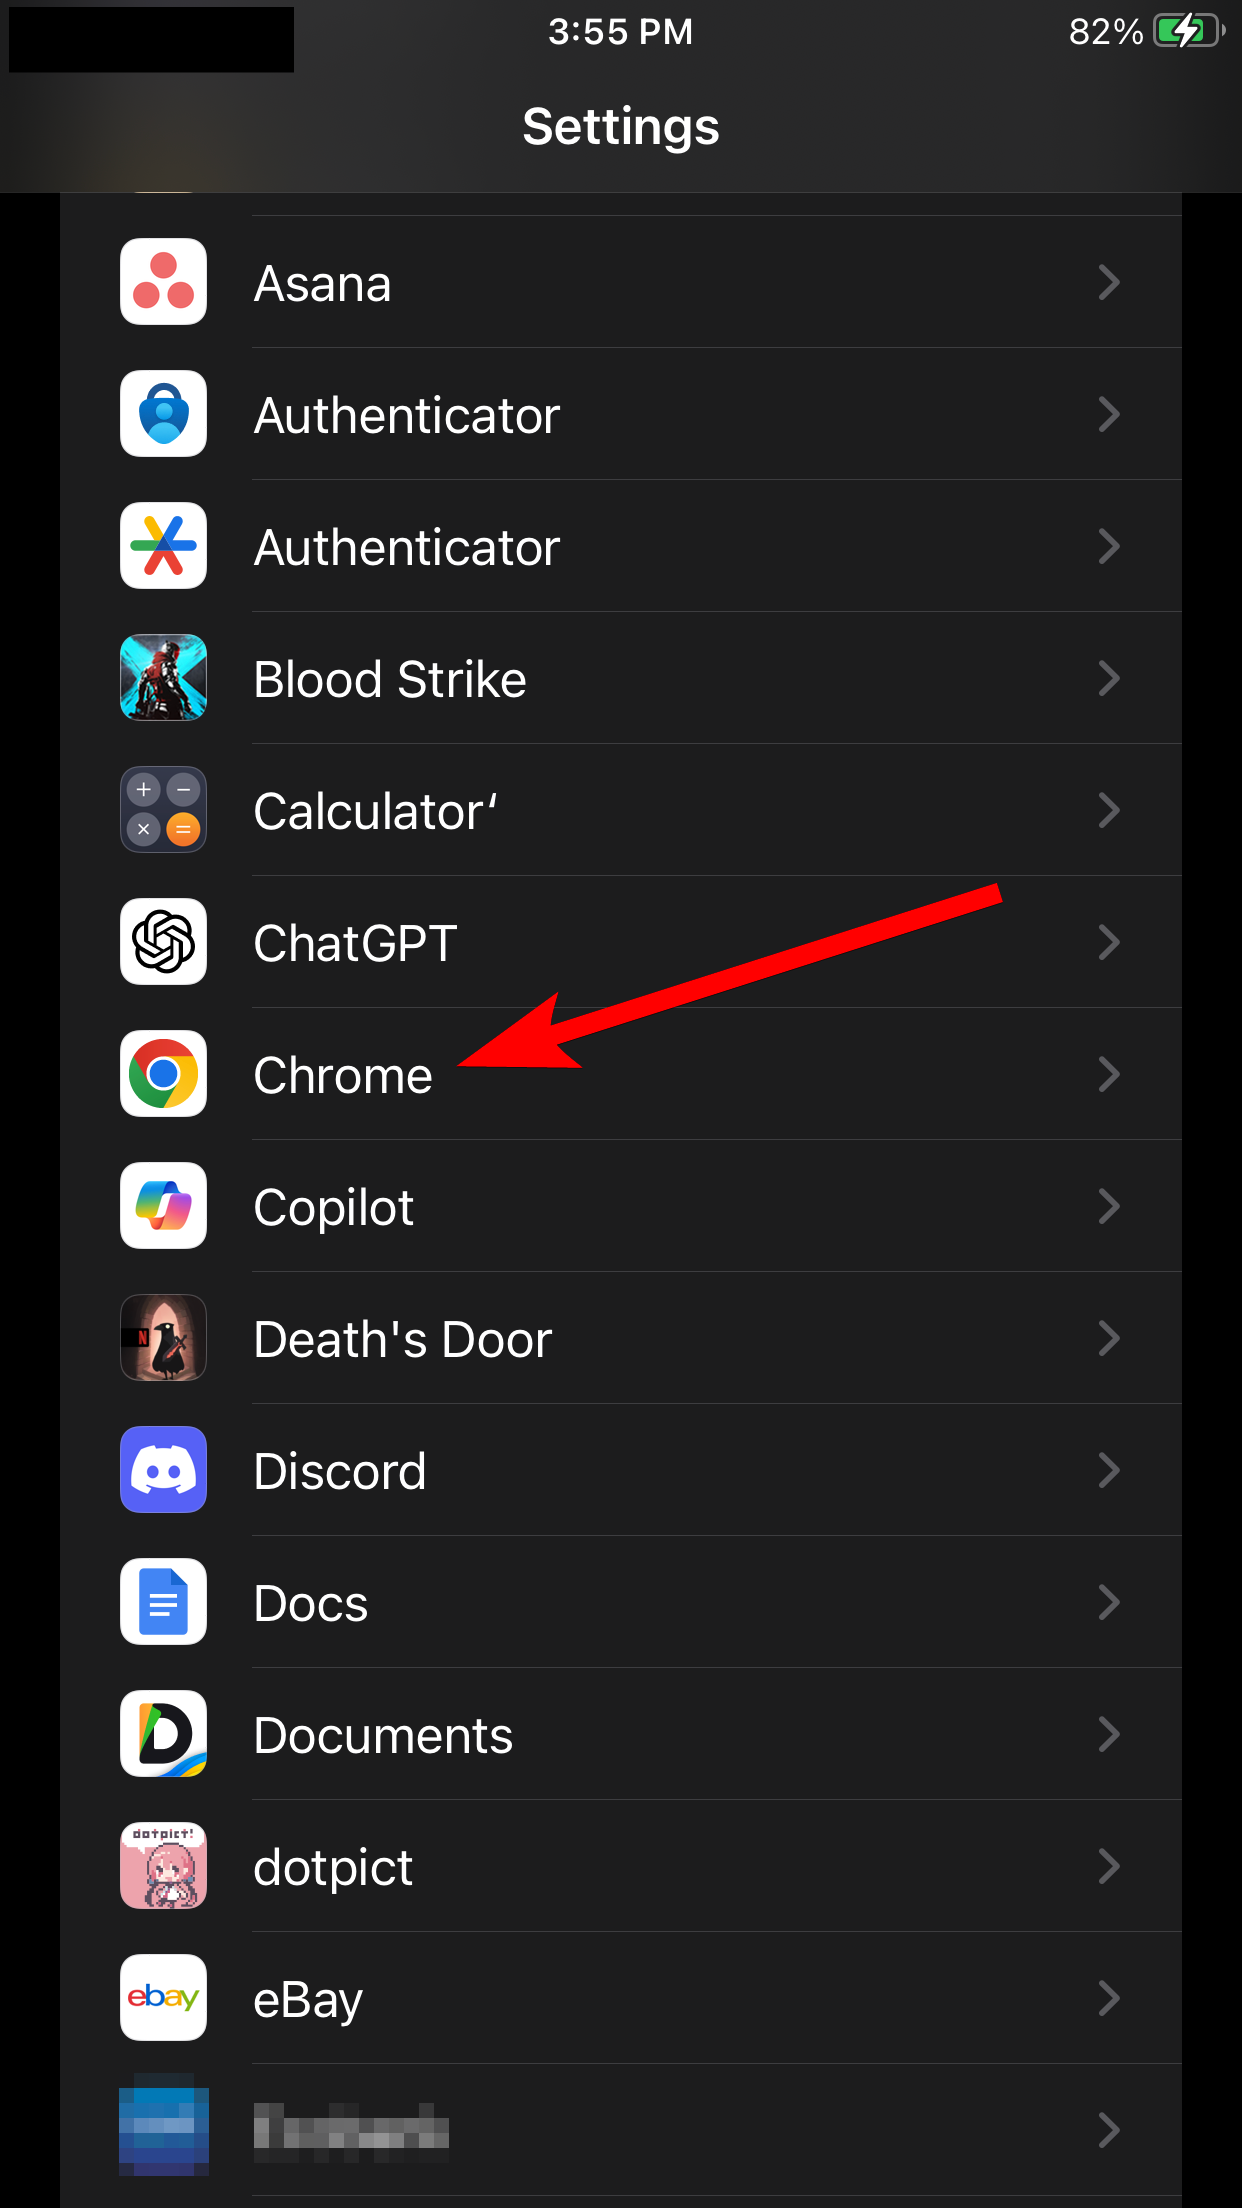 The the "Chrome" option in the Settings app on iPhone.